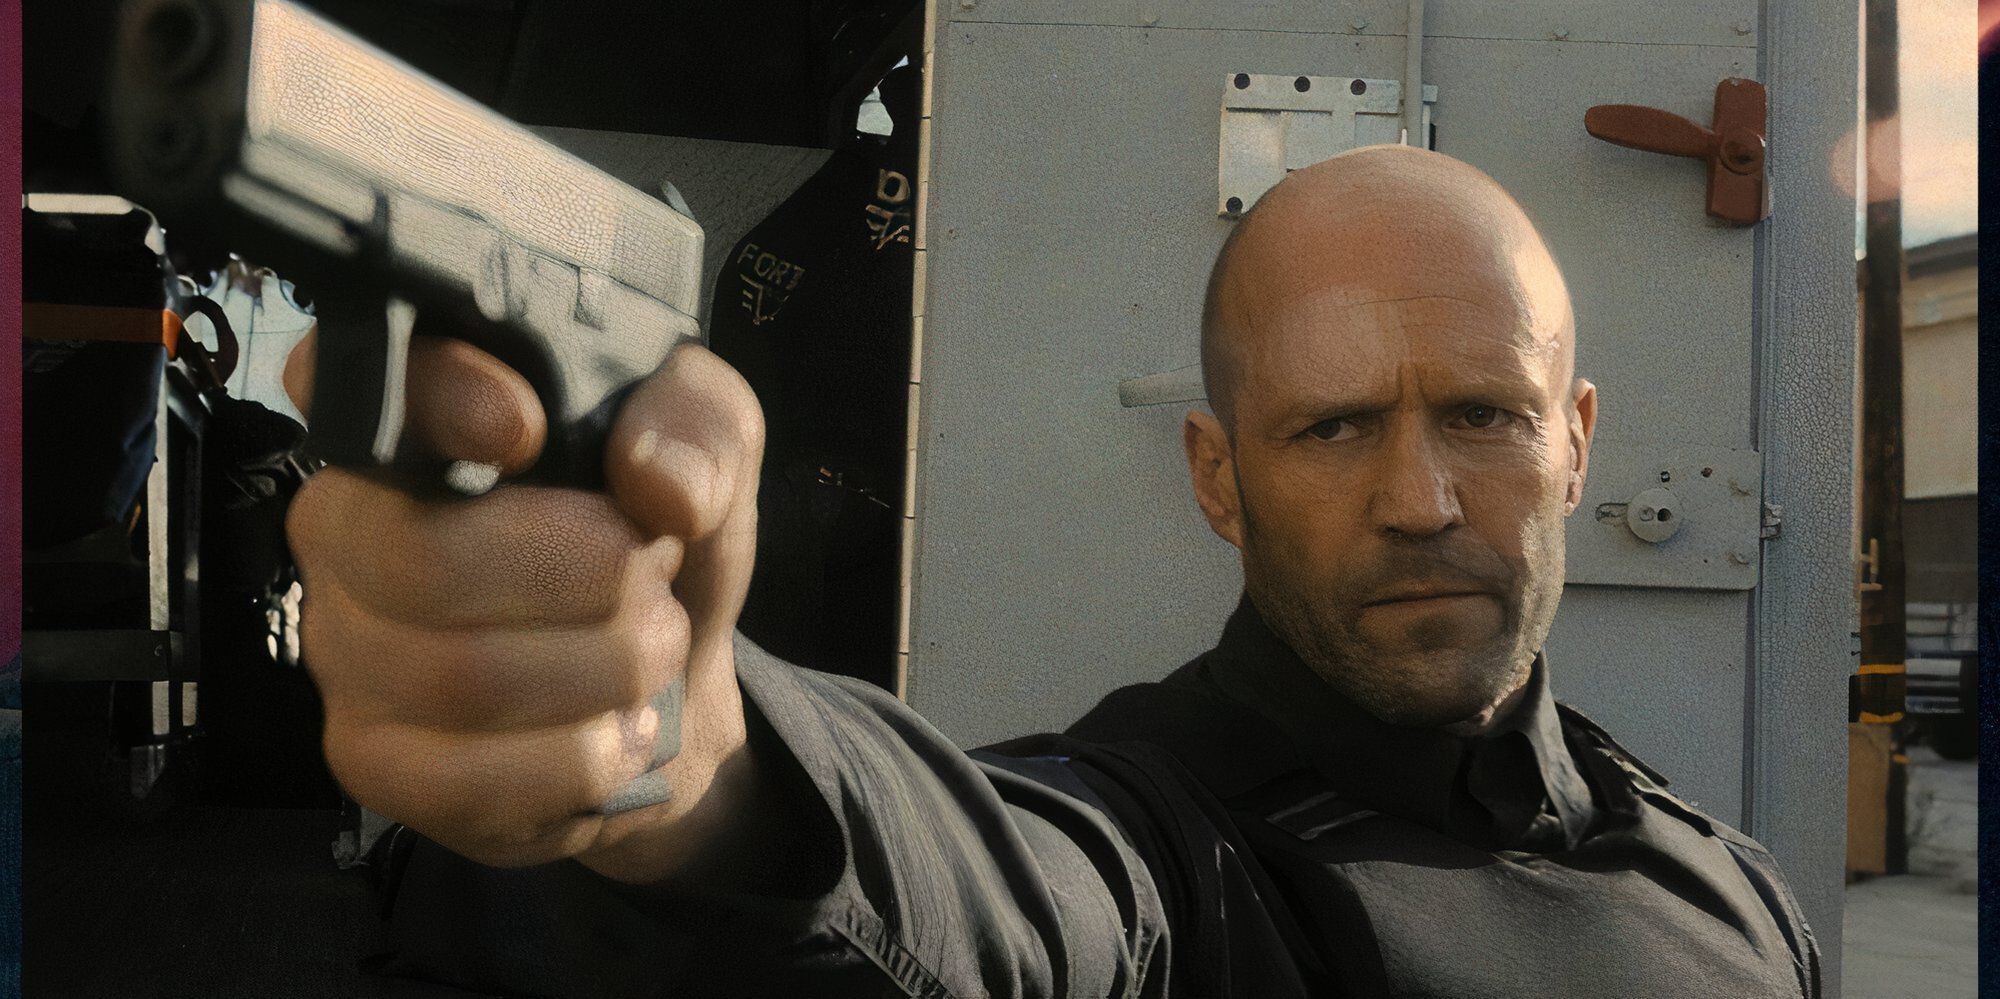 Jason Statham as H in Wrath of Man pointing a gun at someone off-camera.